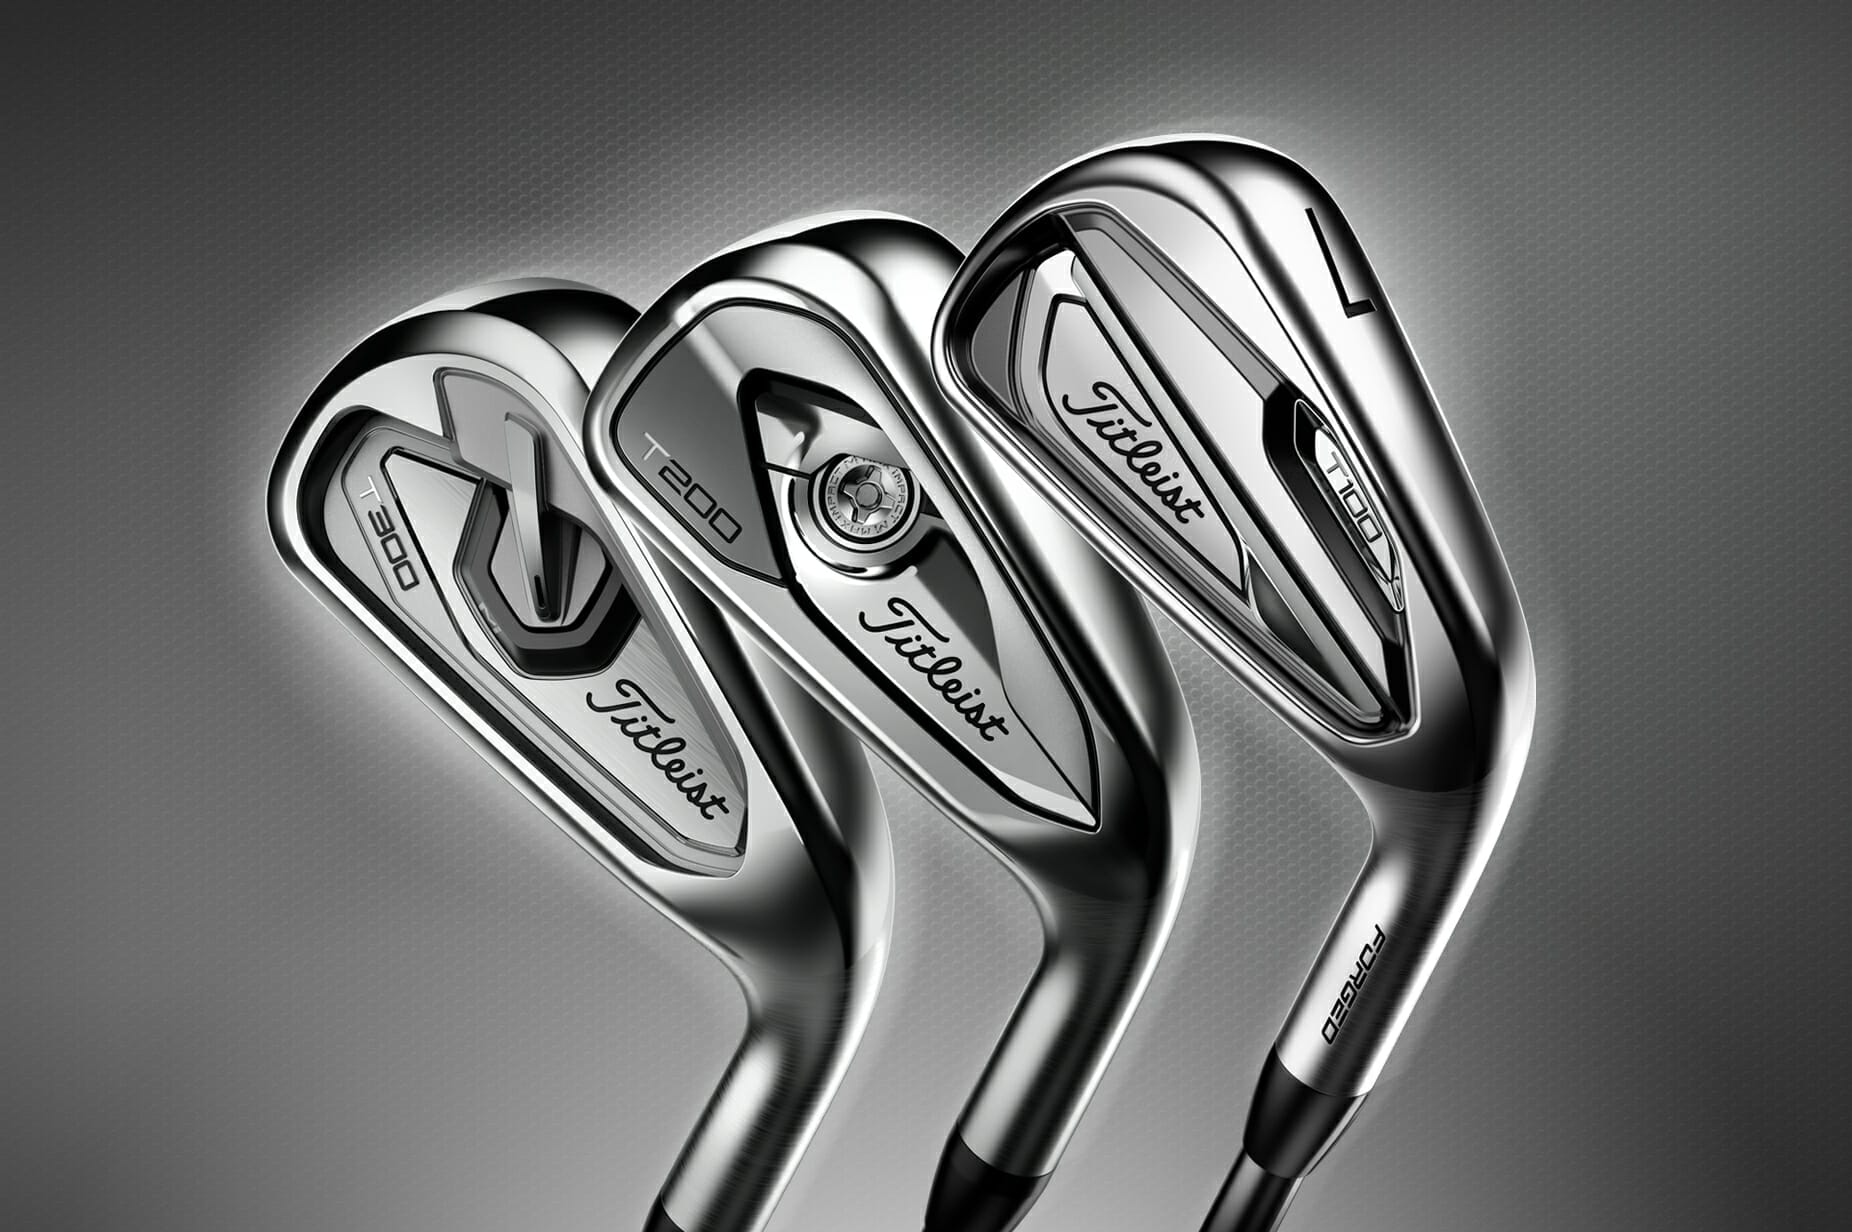 Titleist delivers 3 new iron designs powered by max impact